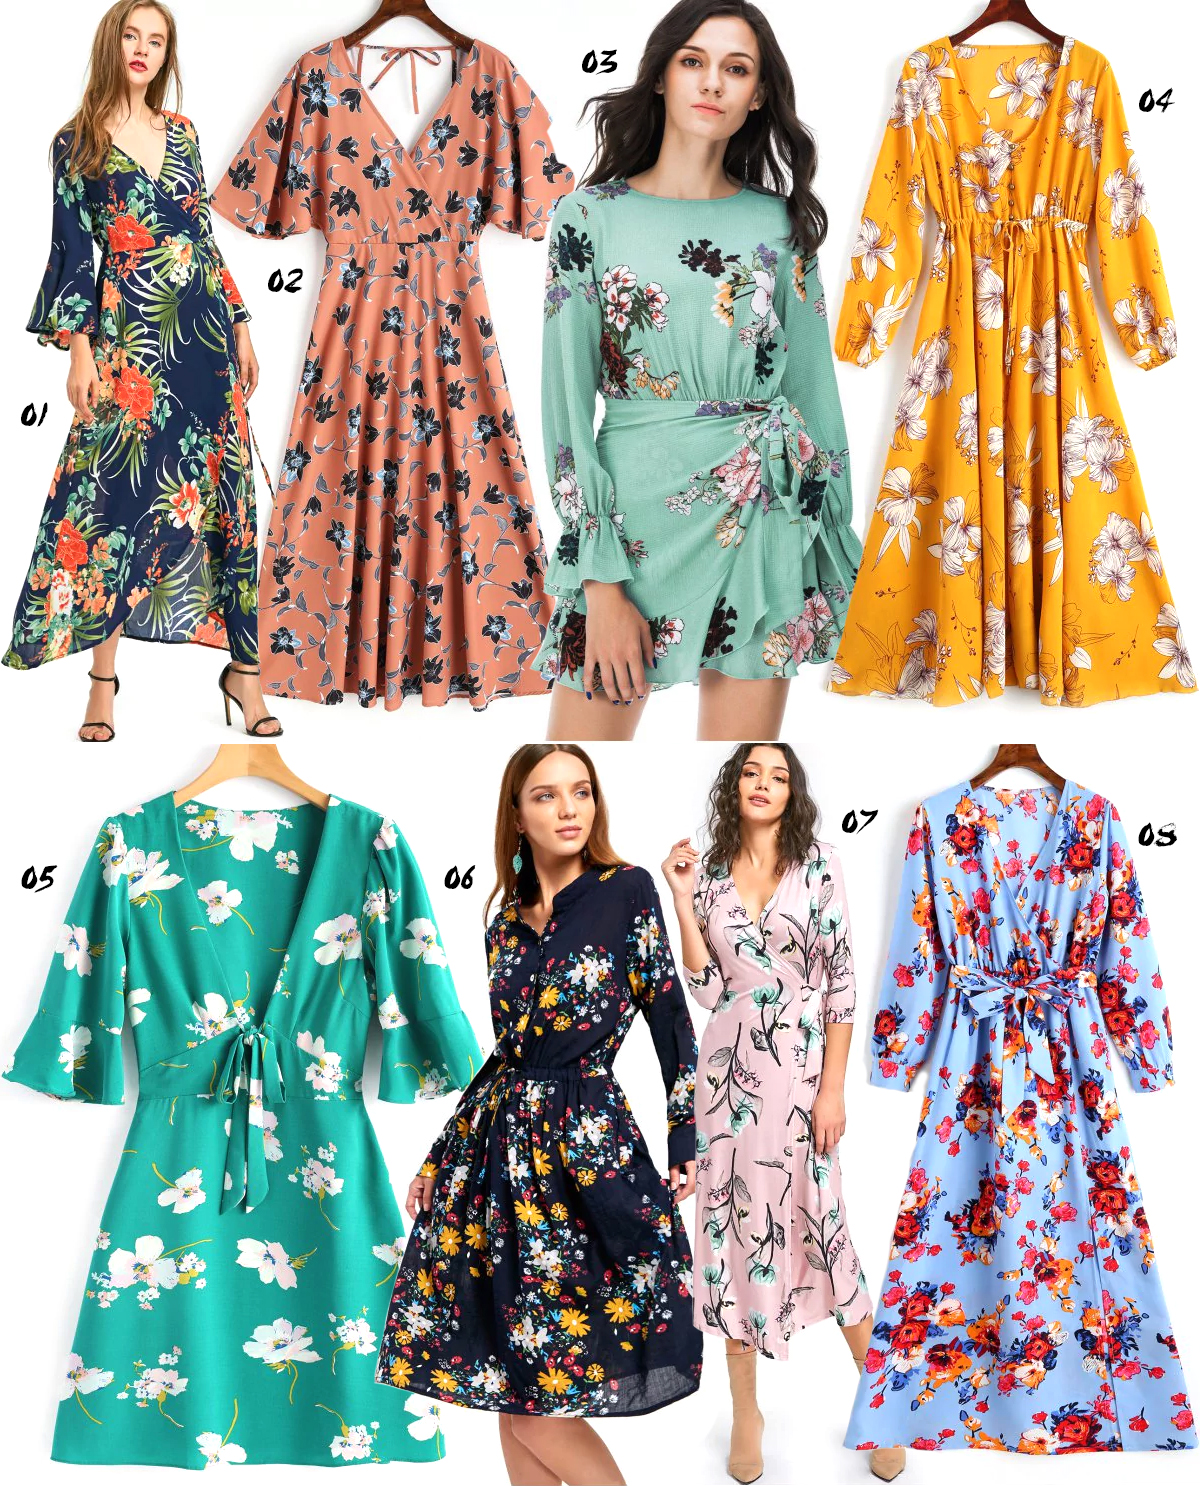 8 Print Dresses To Fall In Love With This Women’s Day – The Casual Cat